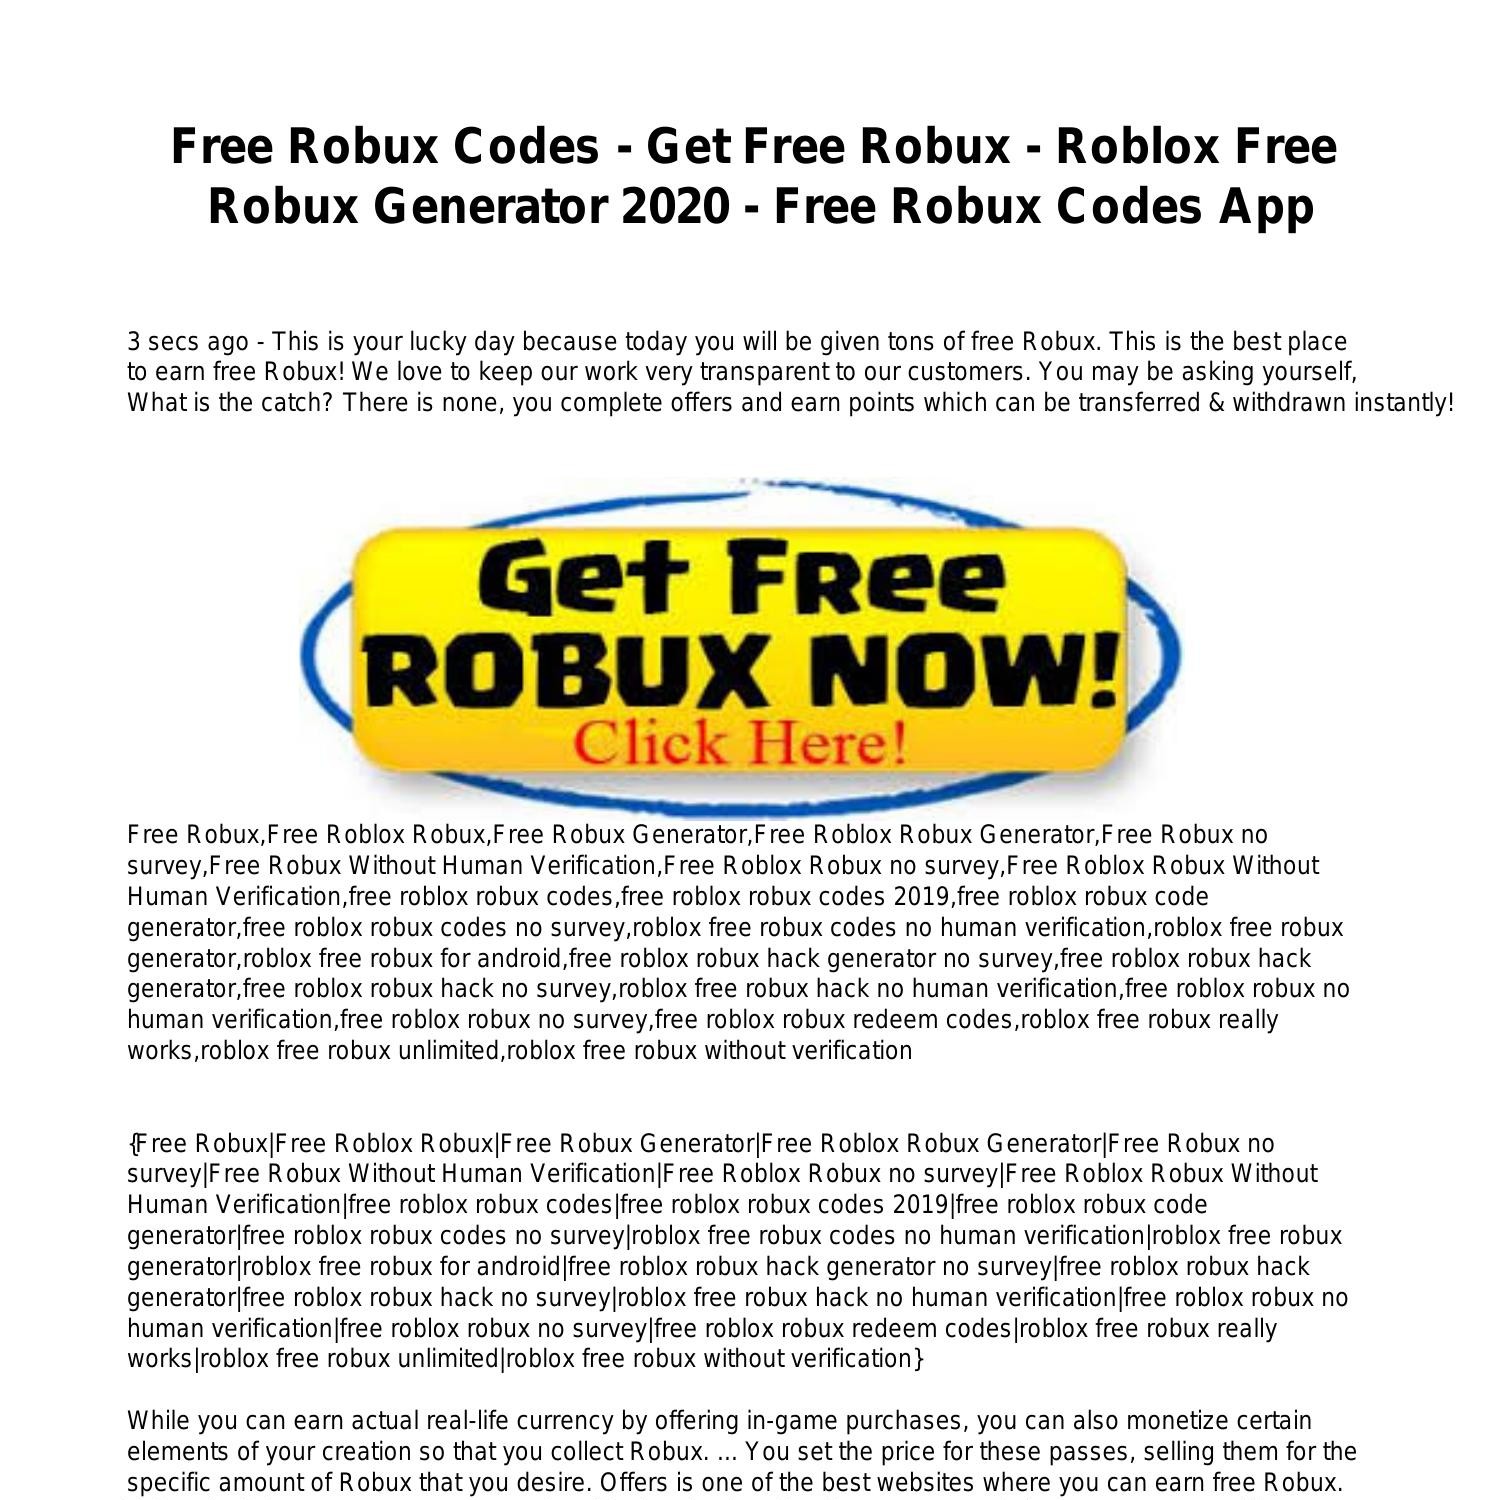 How Do You Get Robux Codes